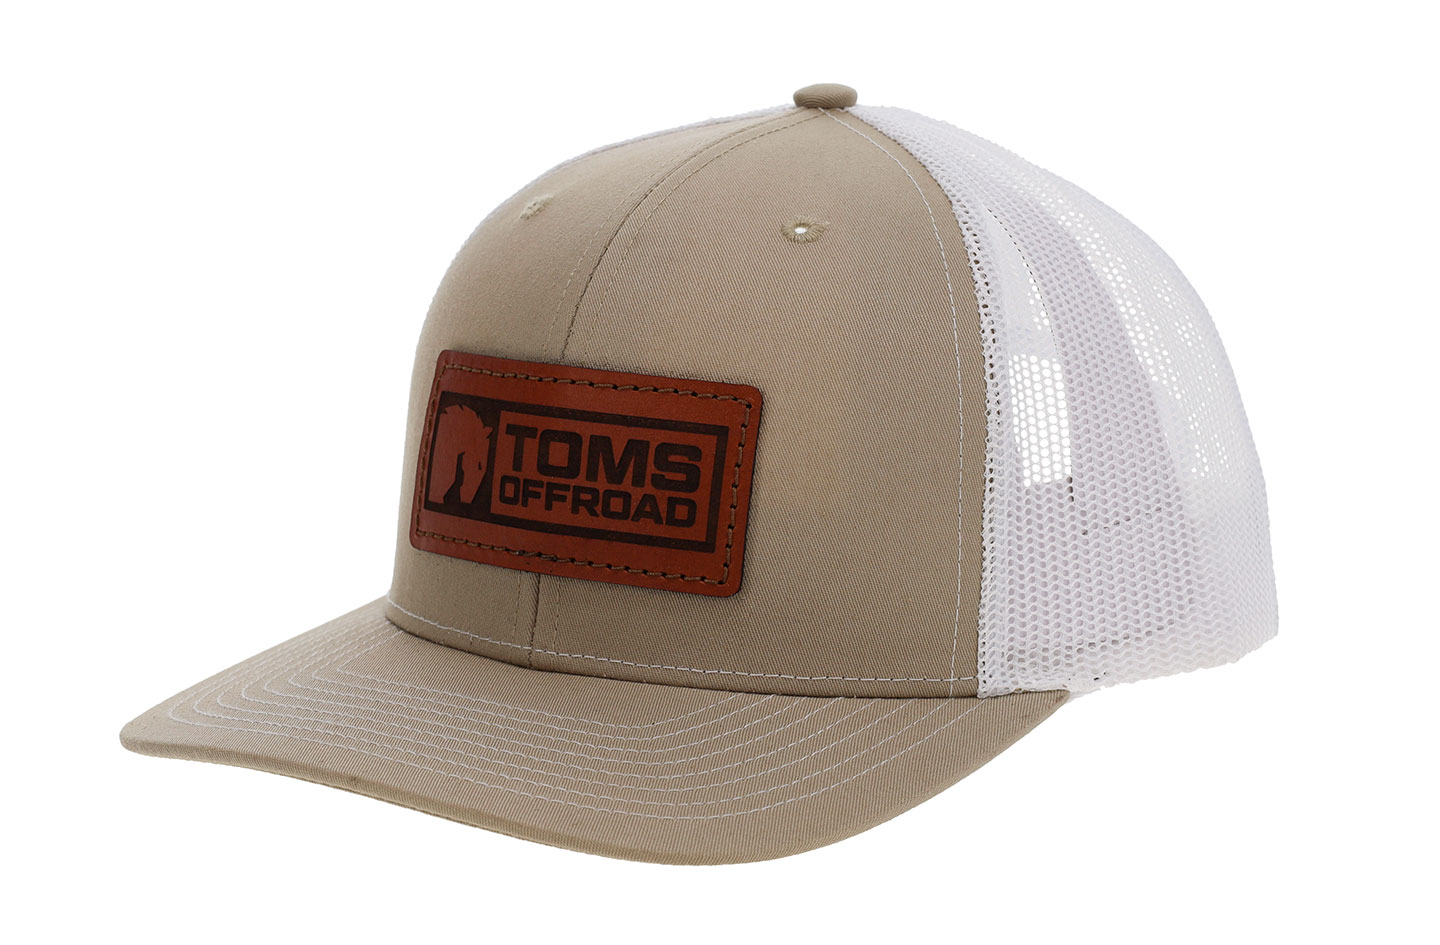 TOMS OFFROAD Hat - Khaki with Chestnut Offroad Patch